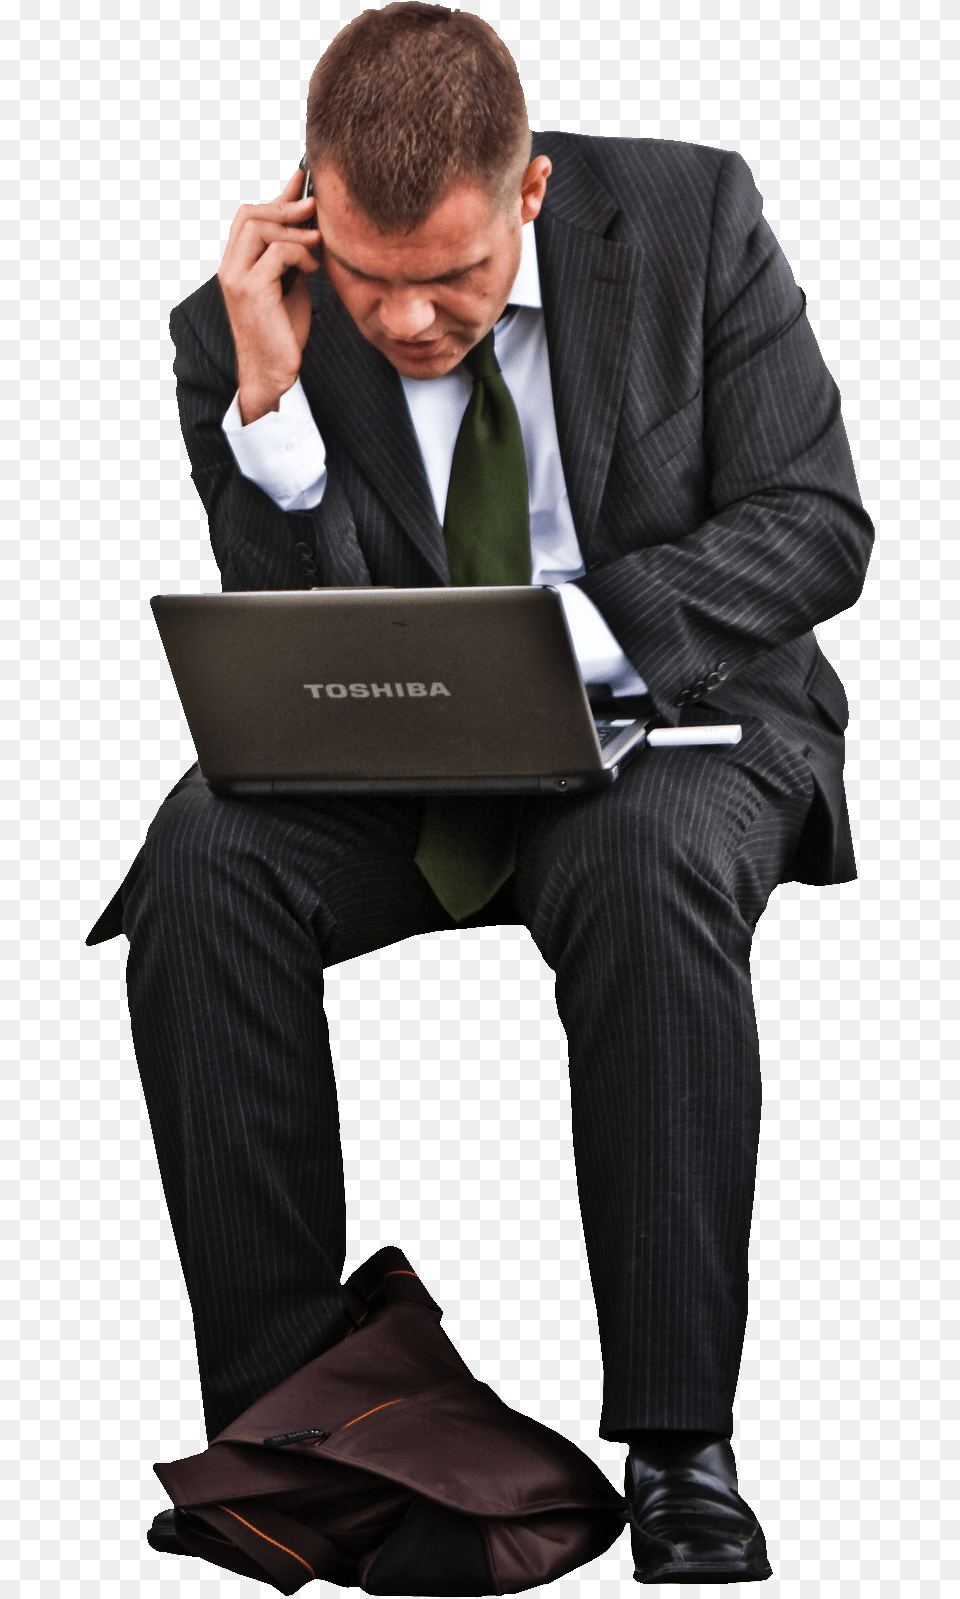 People Cutout Man In Suit Sitting, Accessories, Pc, Laptop, Formal Wear Free Png Download